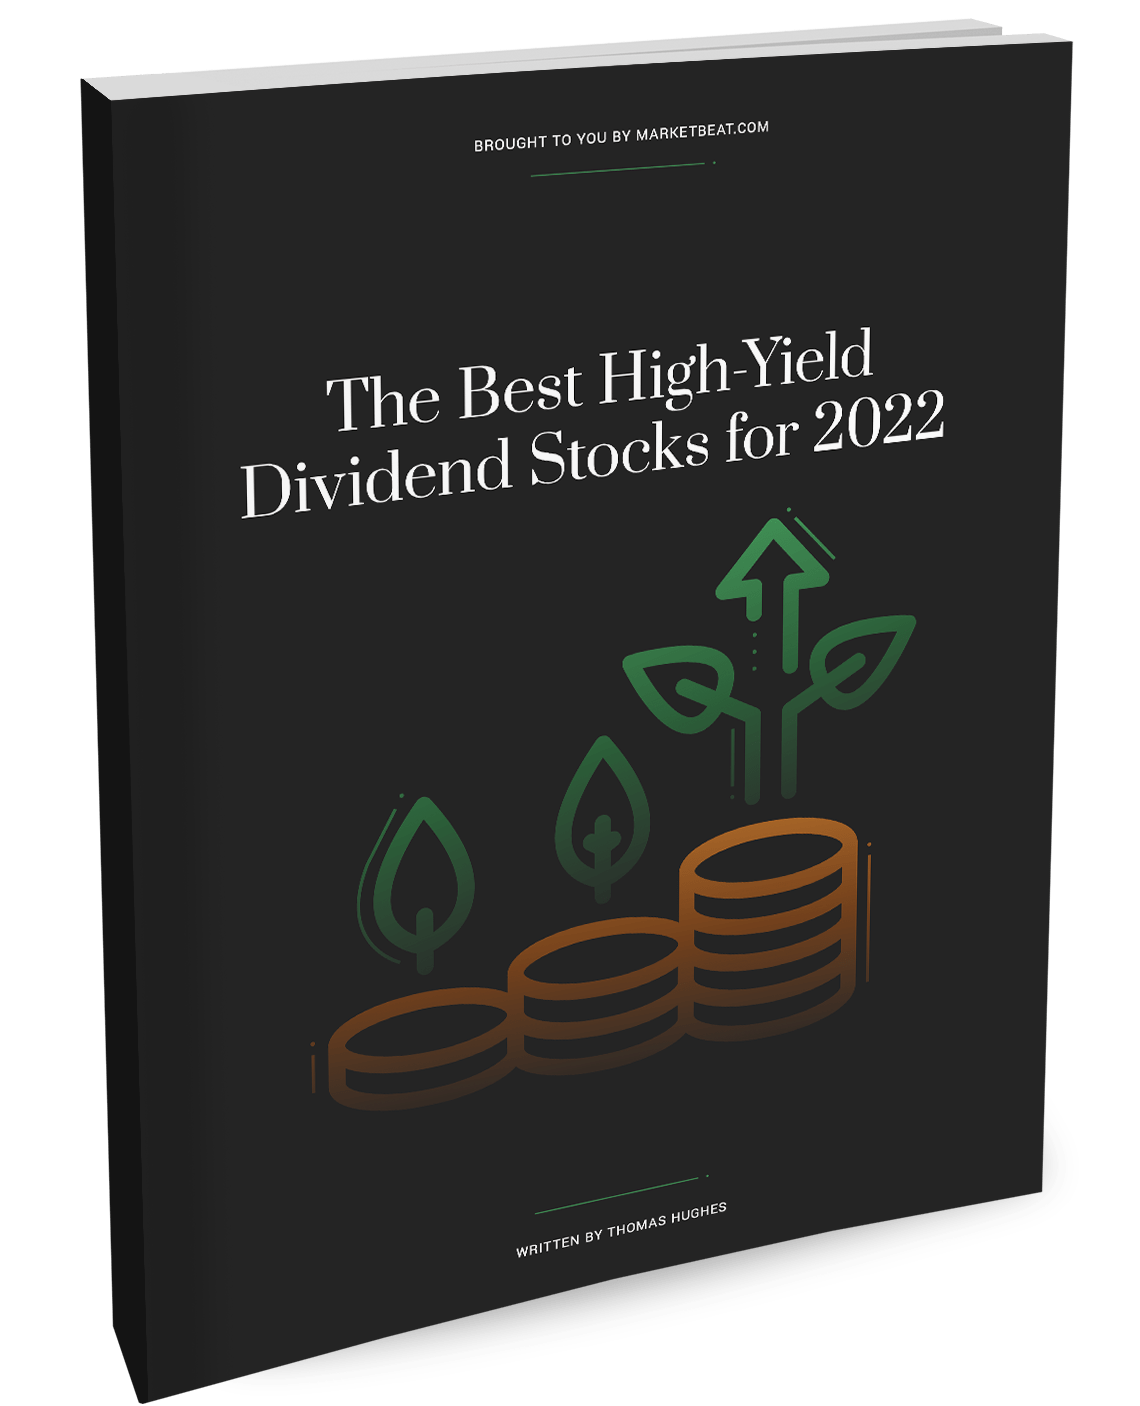 The Best High-Yield Dividend Stocks for 2022